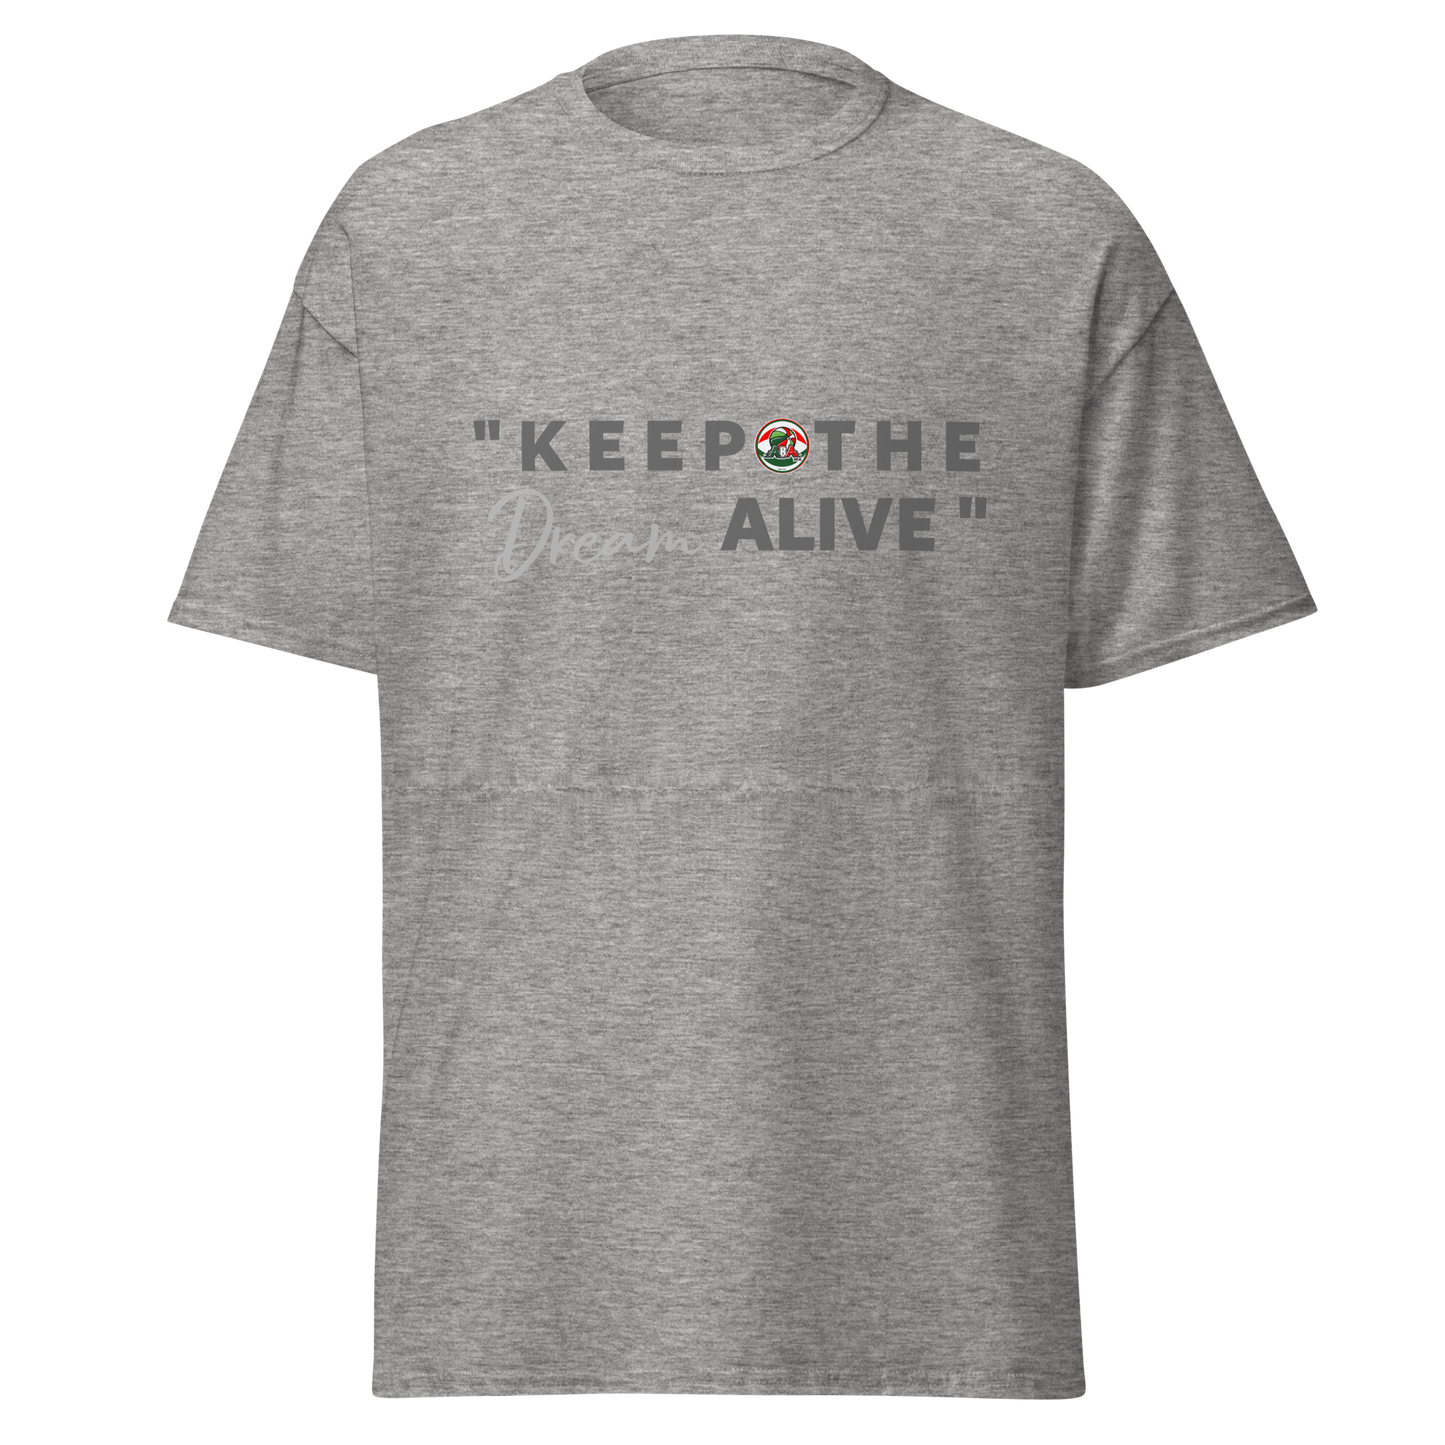 "Keep the Dream Alive" T-Shirt